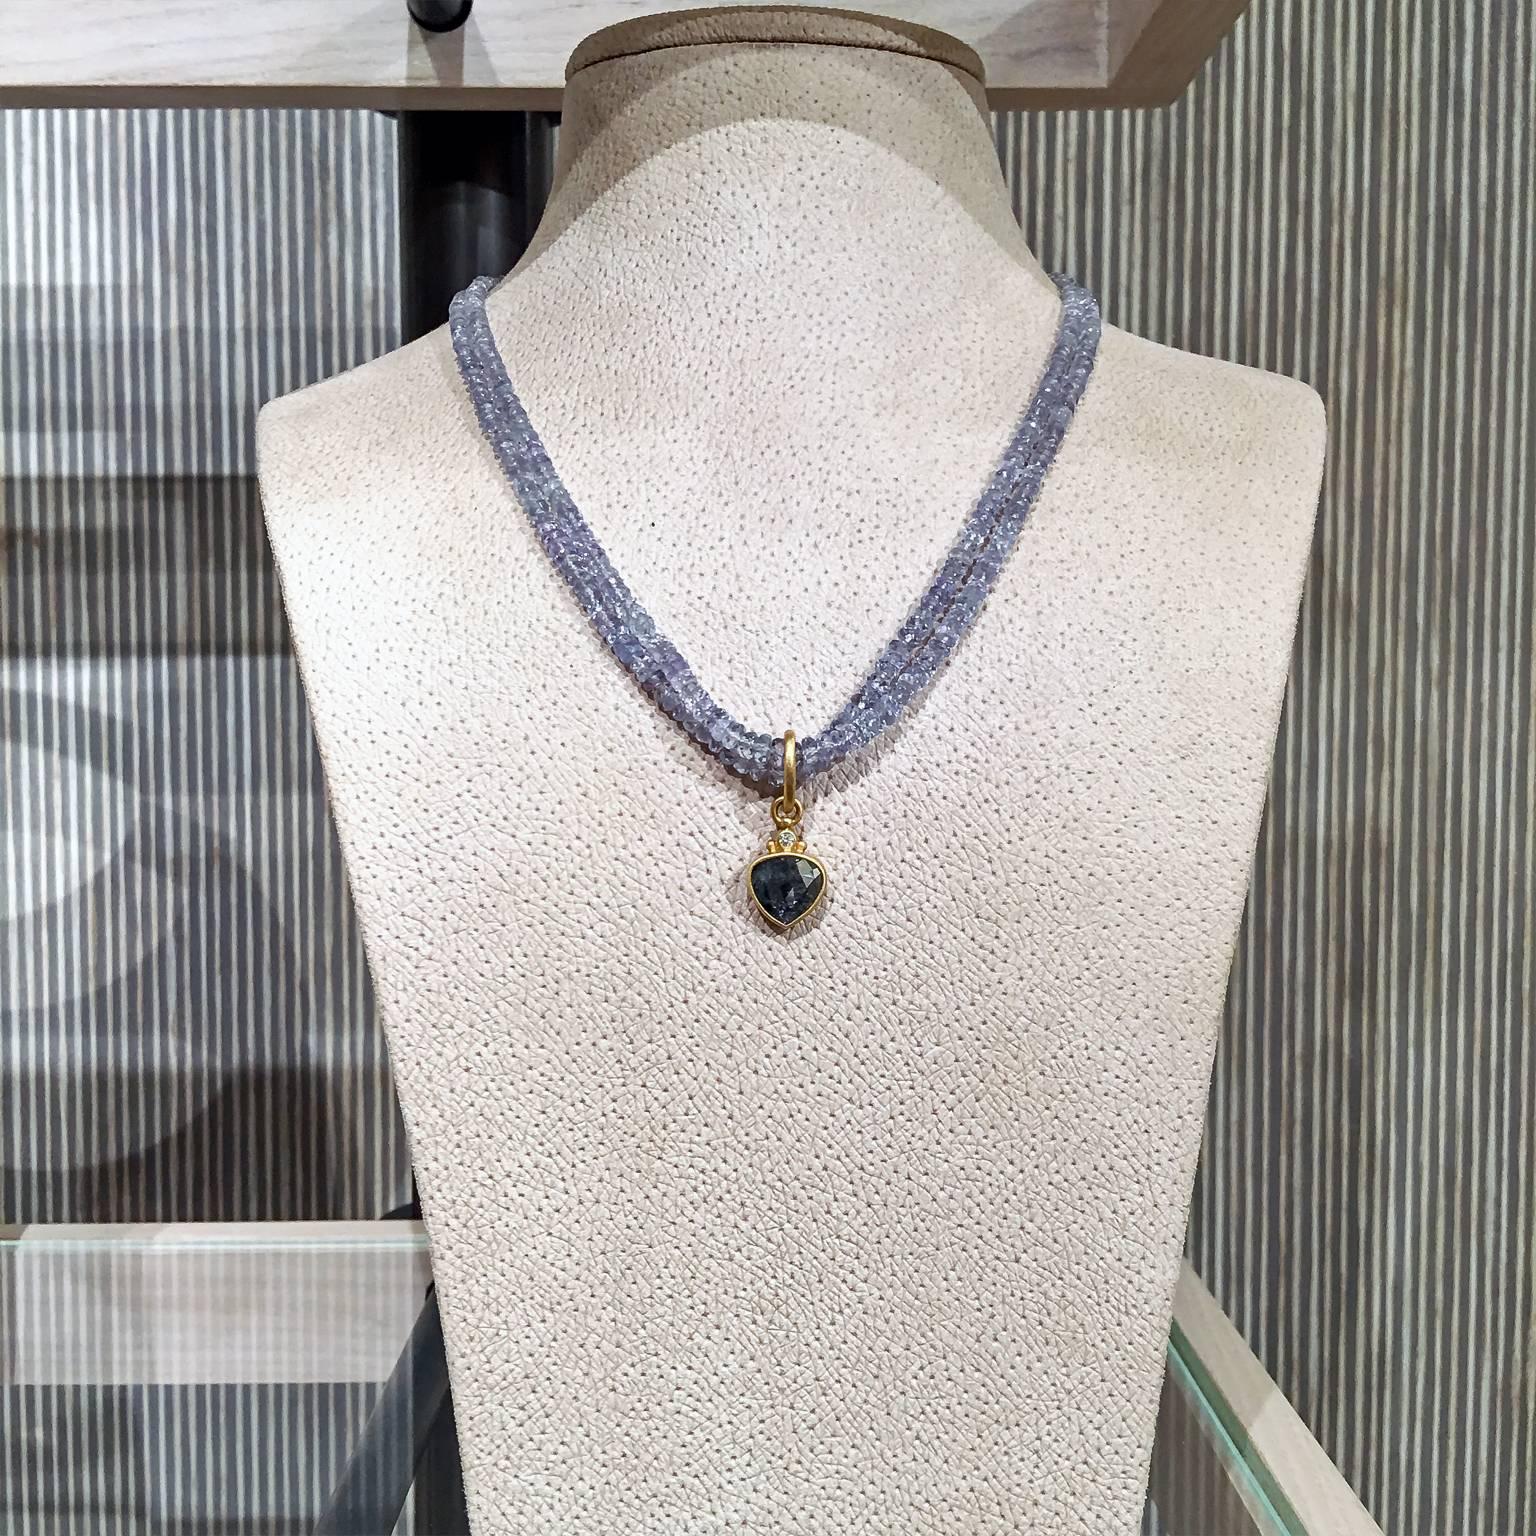 One of a Kind Necklace handcrafted in matte-finished 22k yellow gold by jewelry artist Denise Betesh, showcasing a 1.15 carat unique, glimmering faceted diamond drop that is accented by a 0.02 carat round brilliant-cut white diamond and hand-rolled